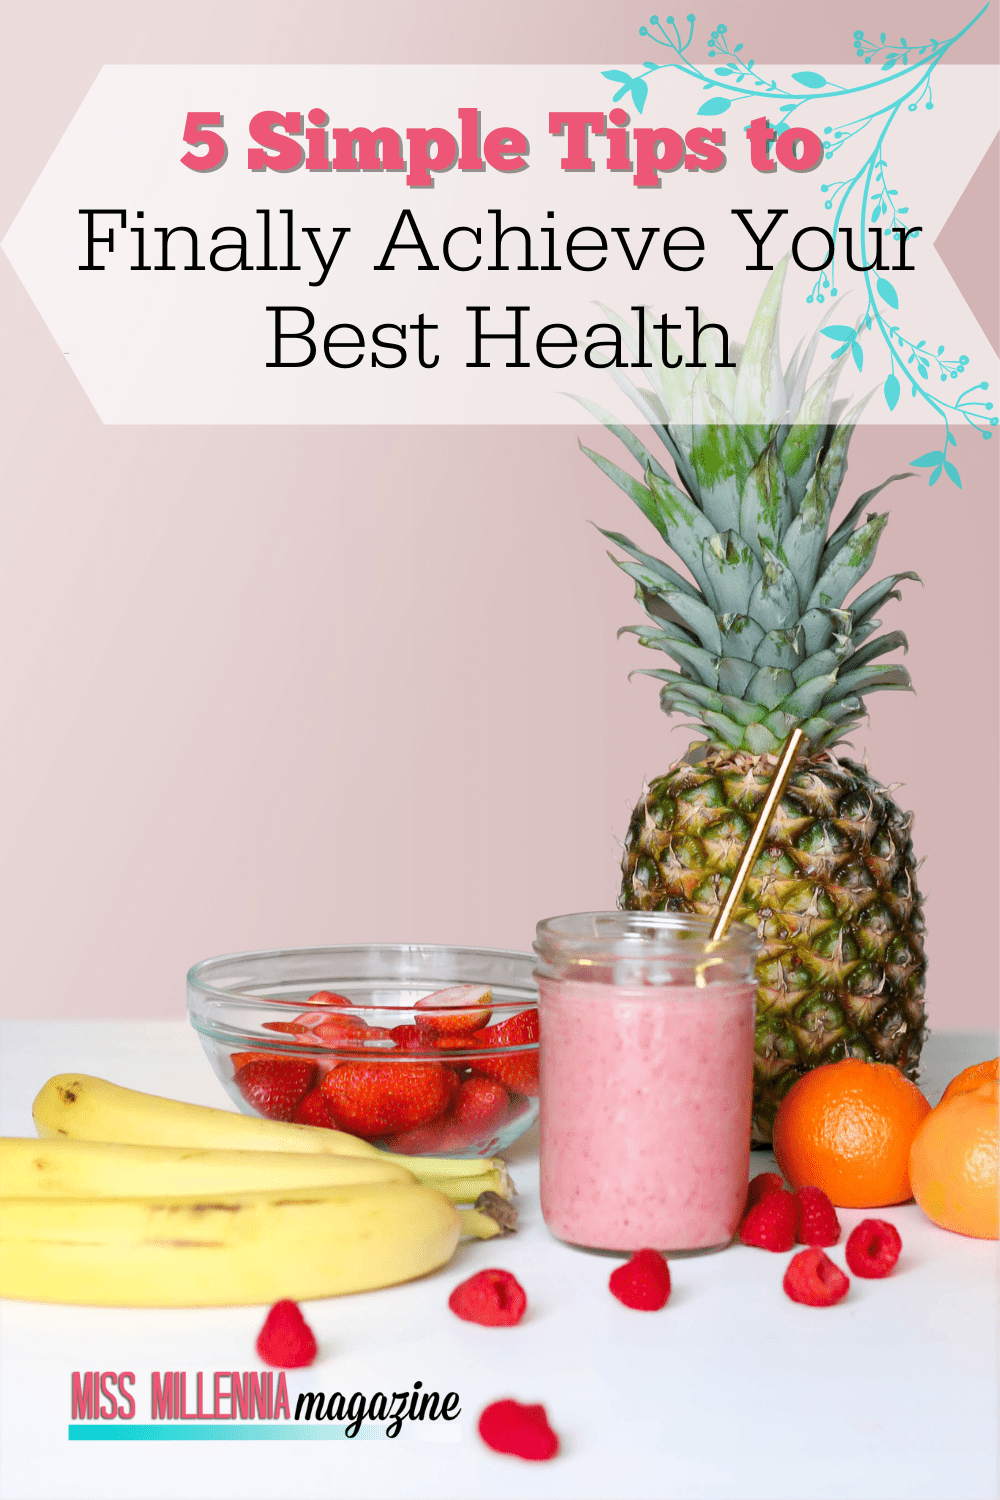 5 Simple Tips to Finally Achieve Your Best Health